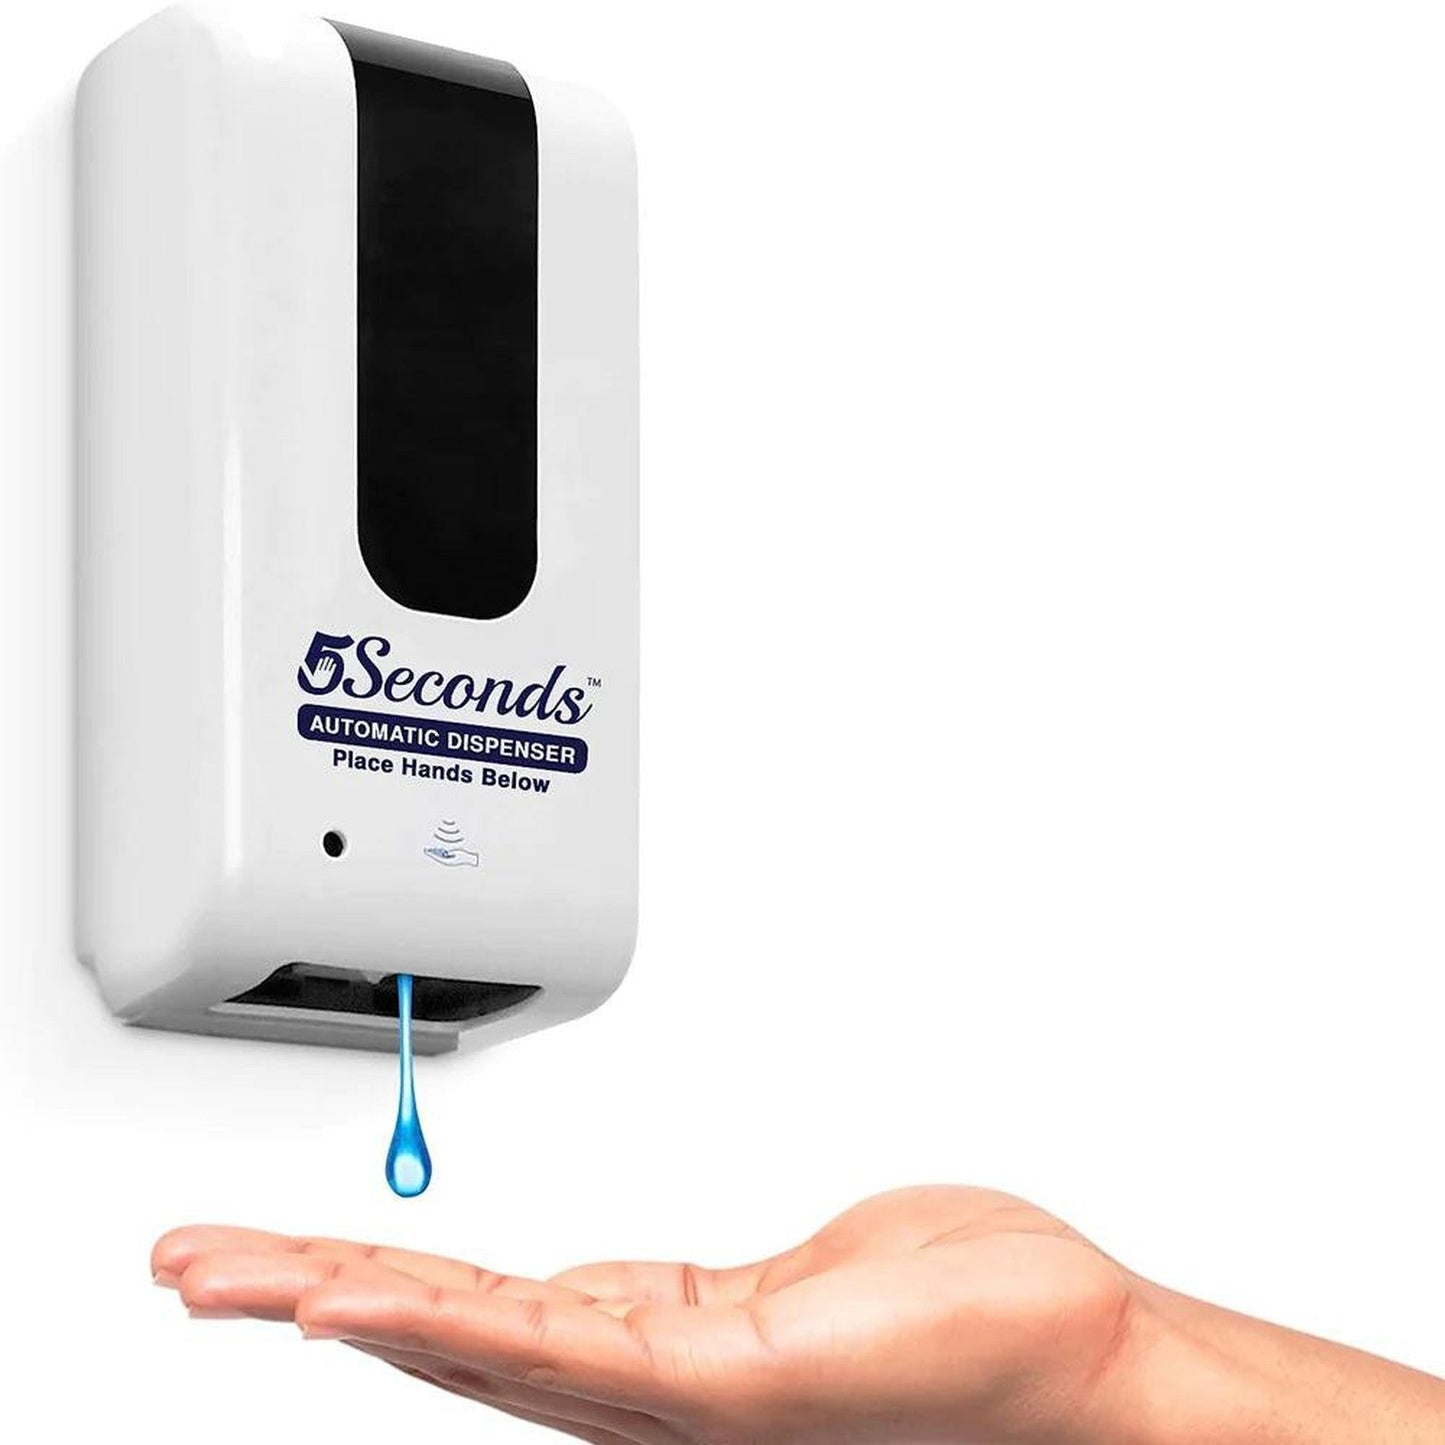 5Seconds Zoho Series 6" White Touchless Automatic Wall-Mount Liquid Soap Dispenser With Infrared Sensor